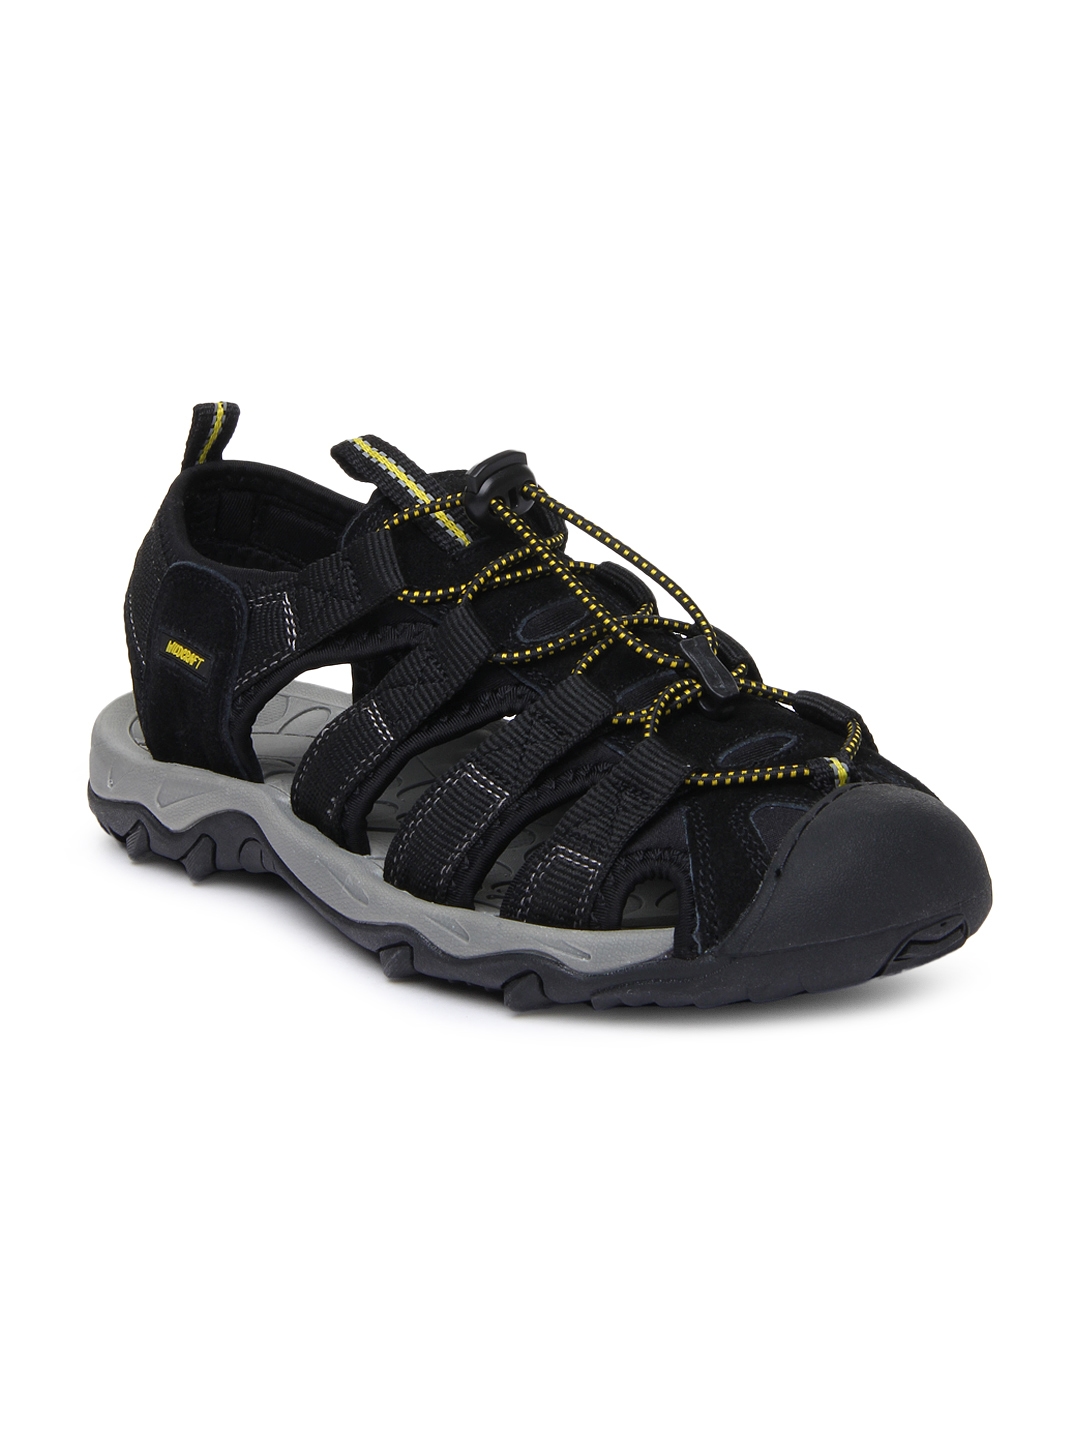 Wildcraft Men's Black Sandals and Floaters - 11 UK/India (46 EU) :  Amazon.in: Fashion